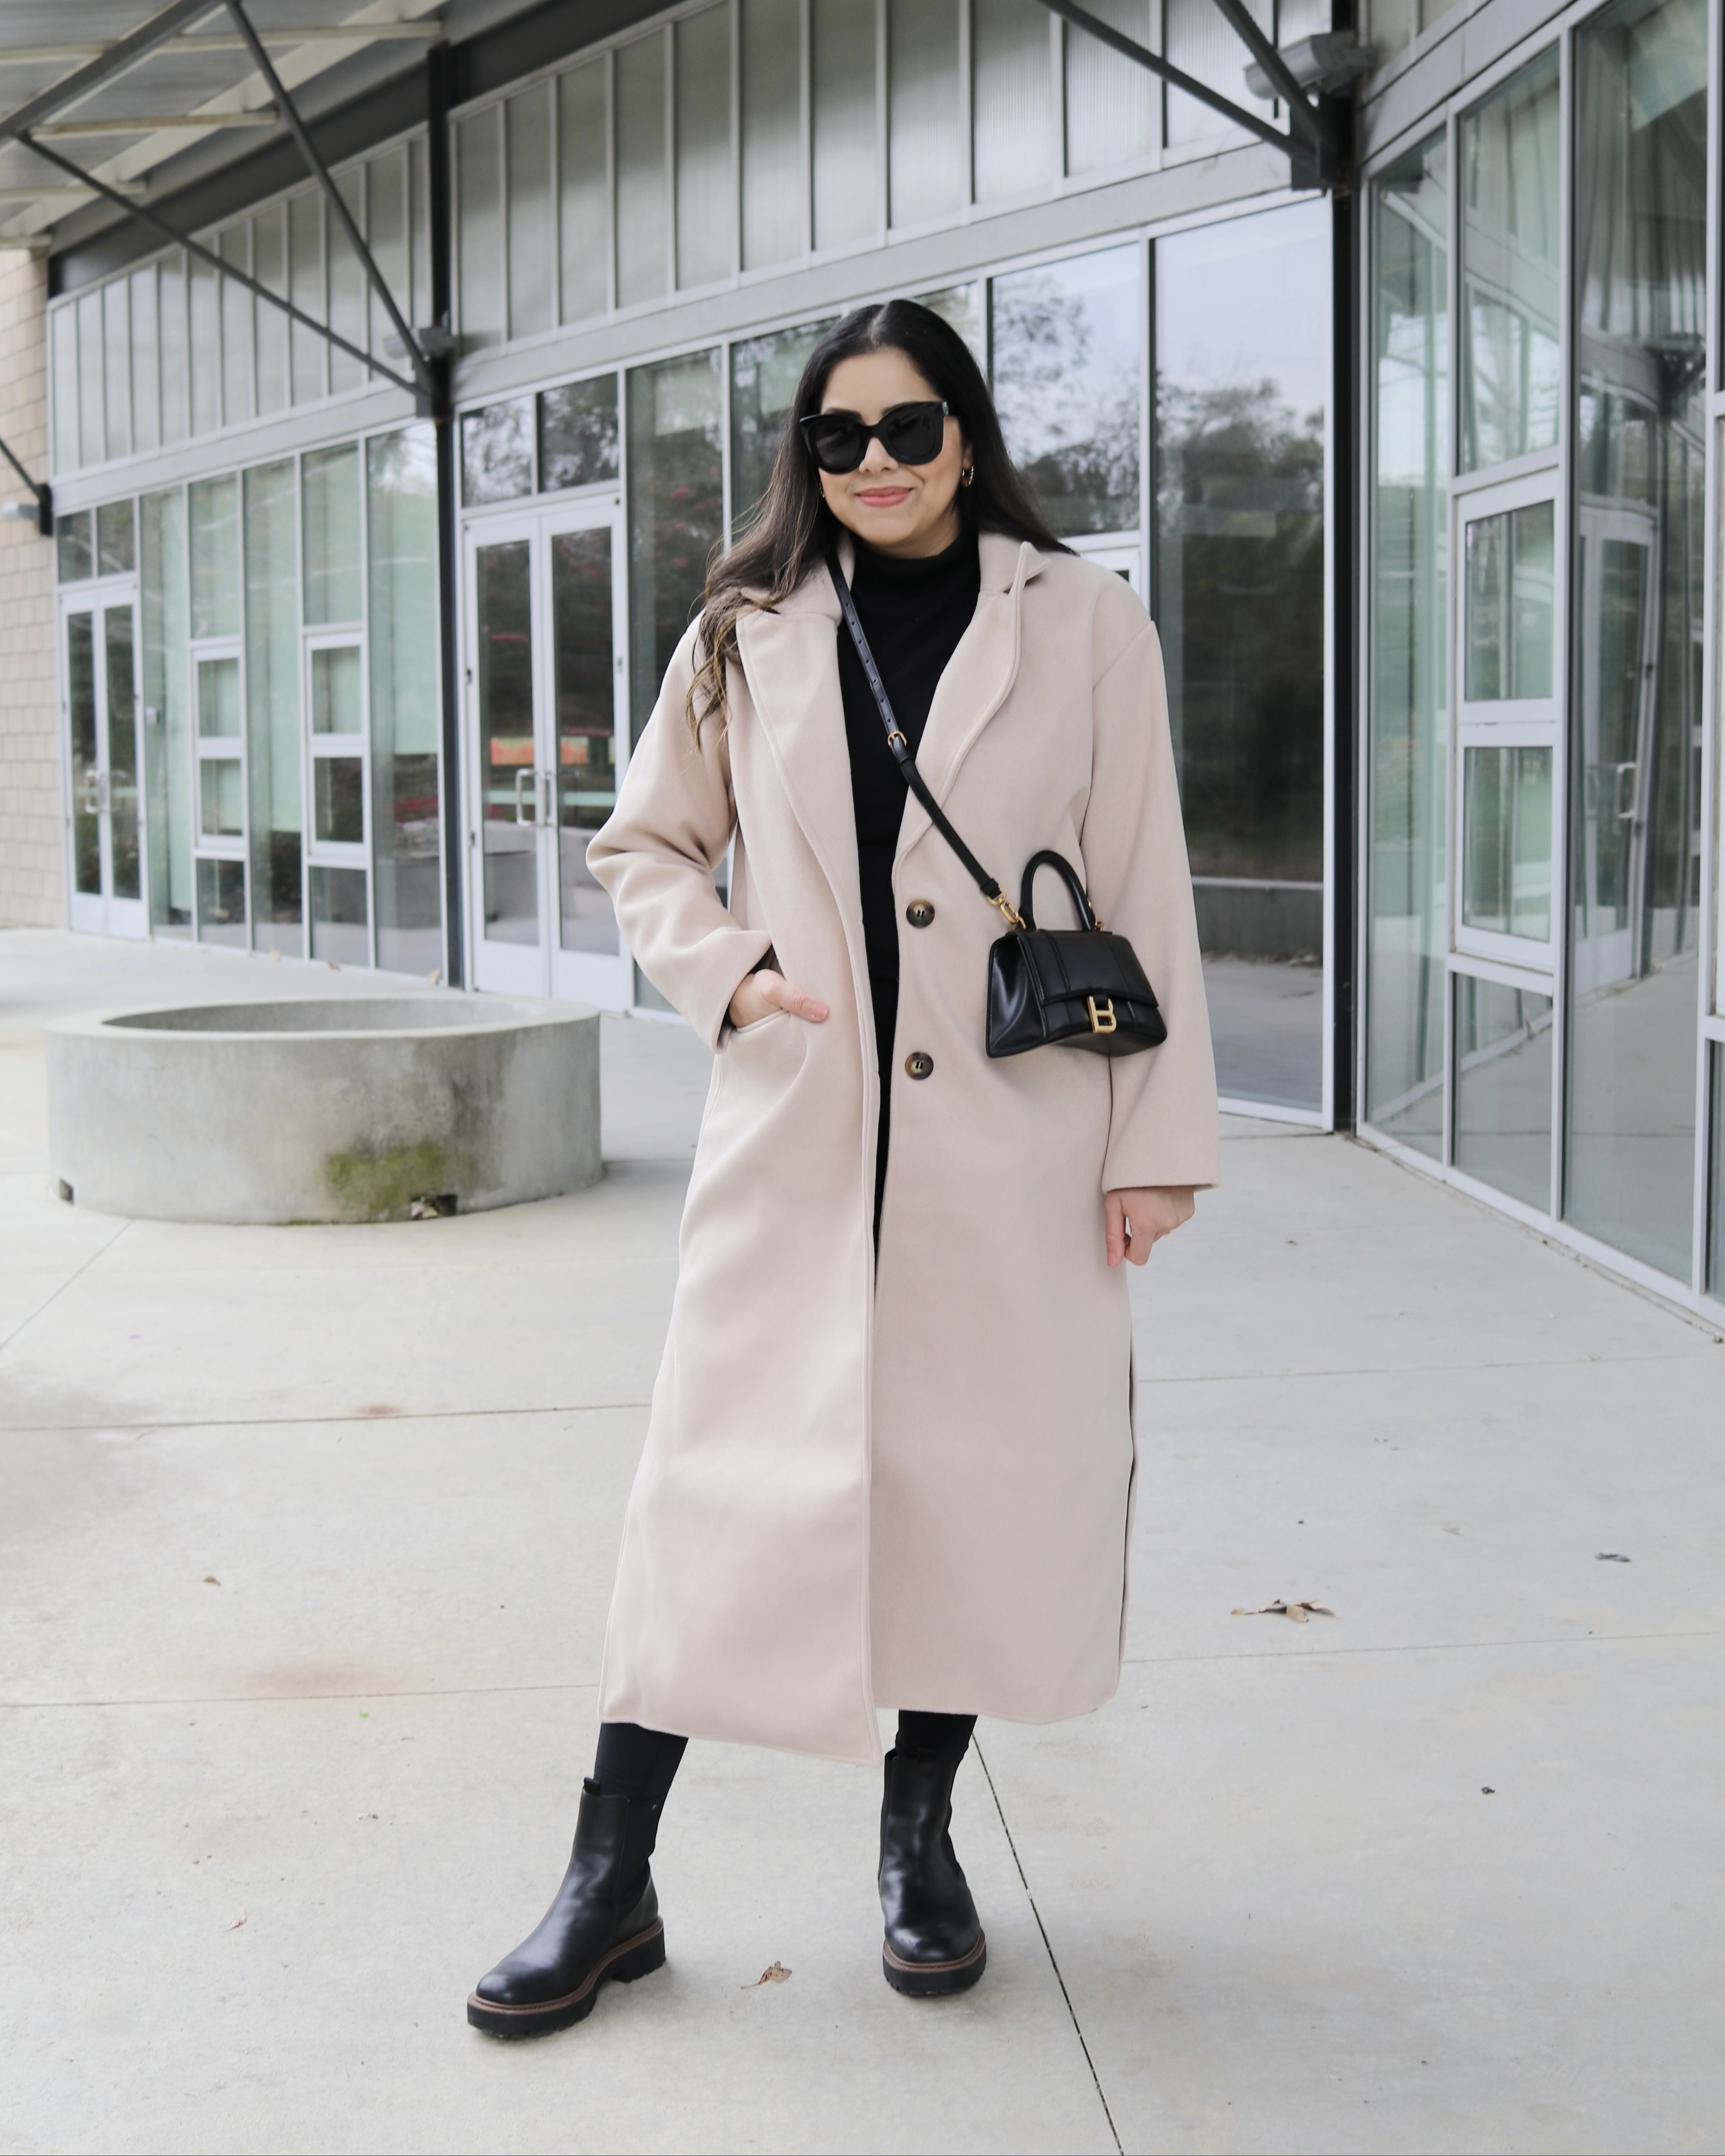 How to wear a long coat in a sleek way - Lil bits of Chic